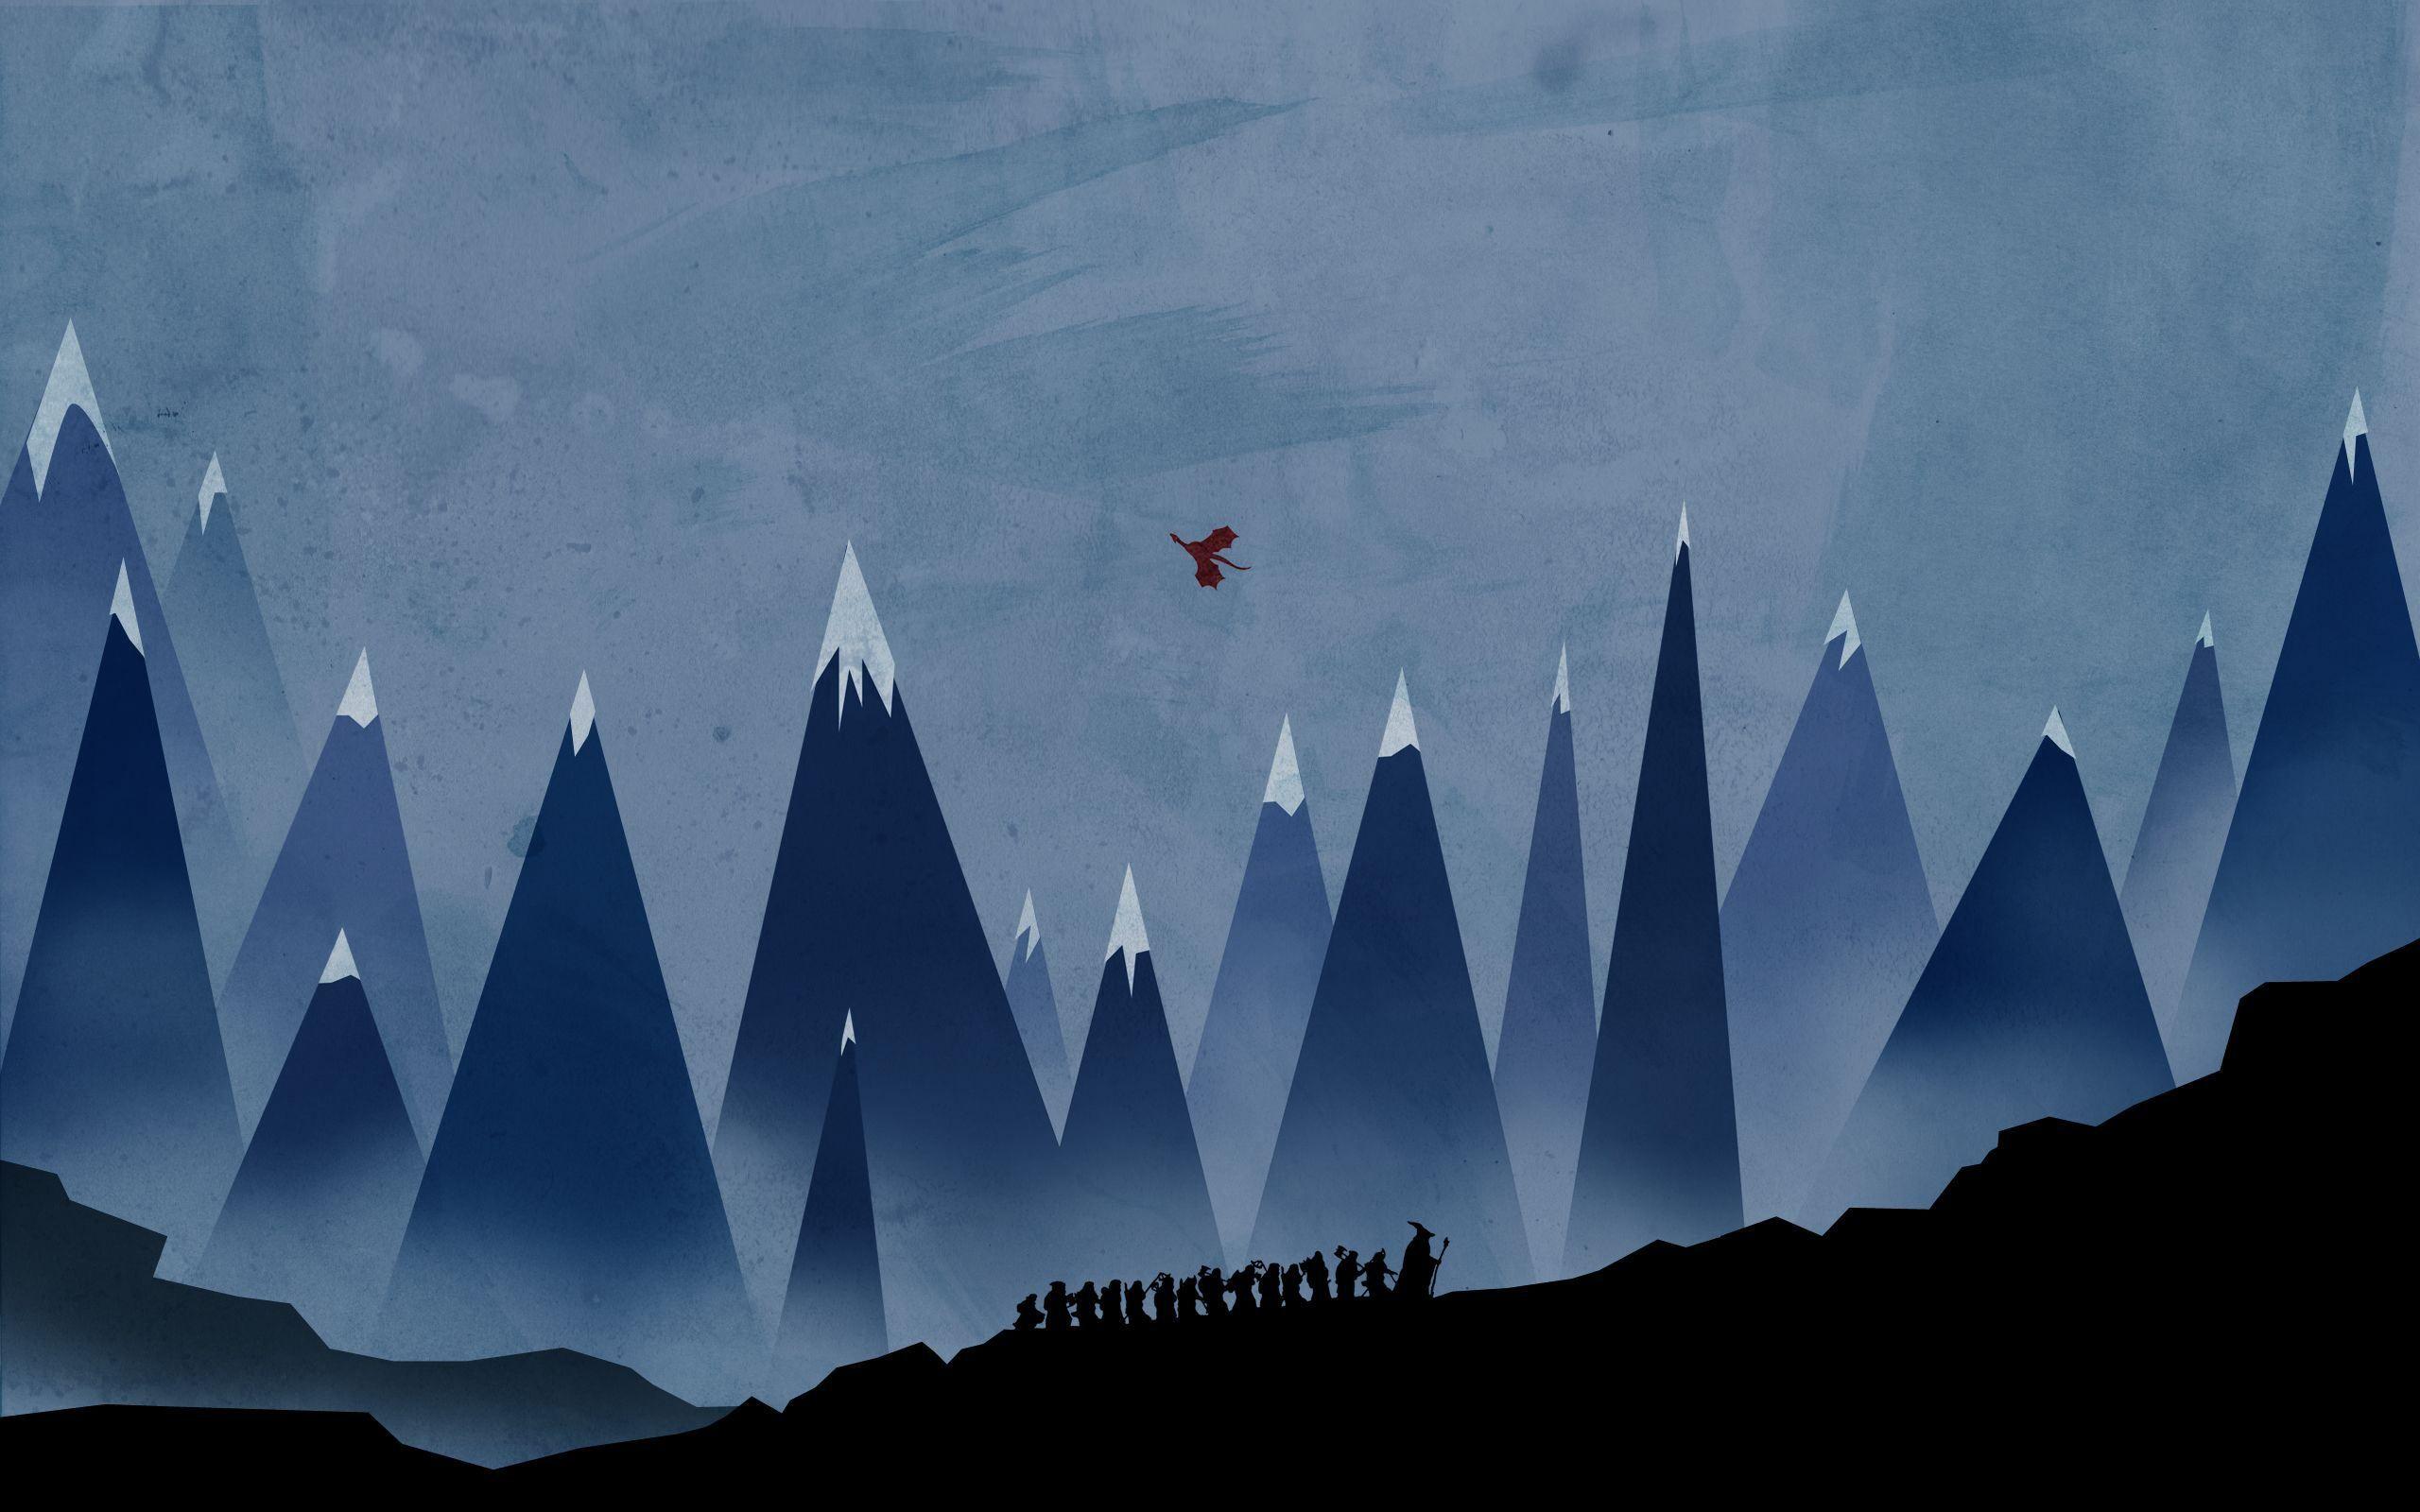 Lord of the Rings Minimalist Wallpaper Free Lord of the Rings Minimalist Background